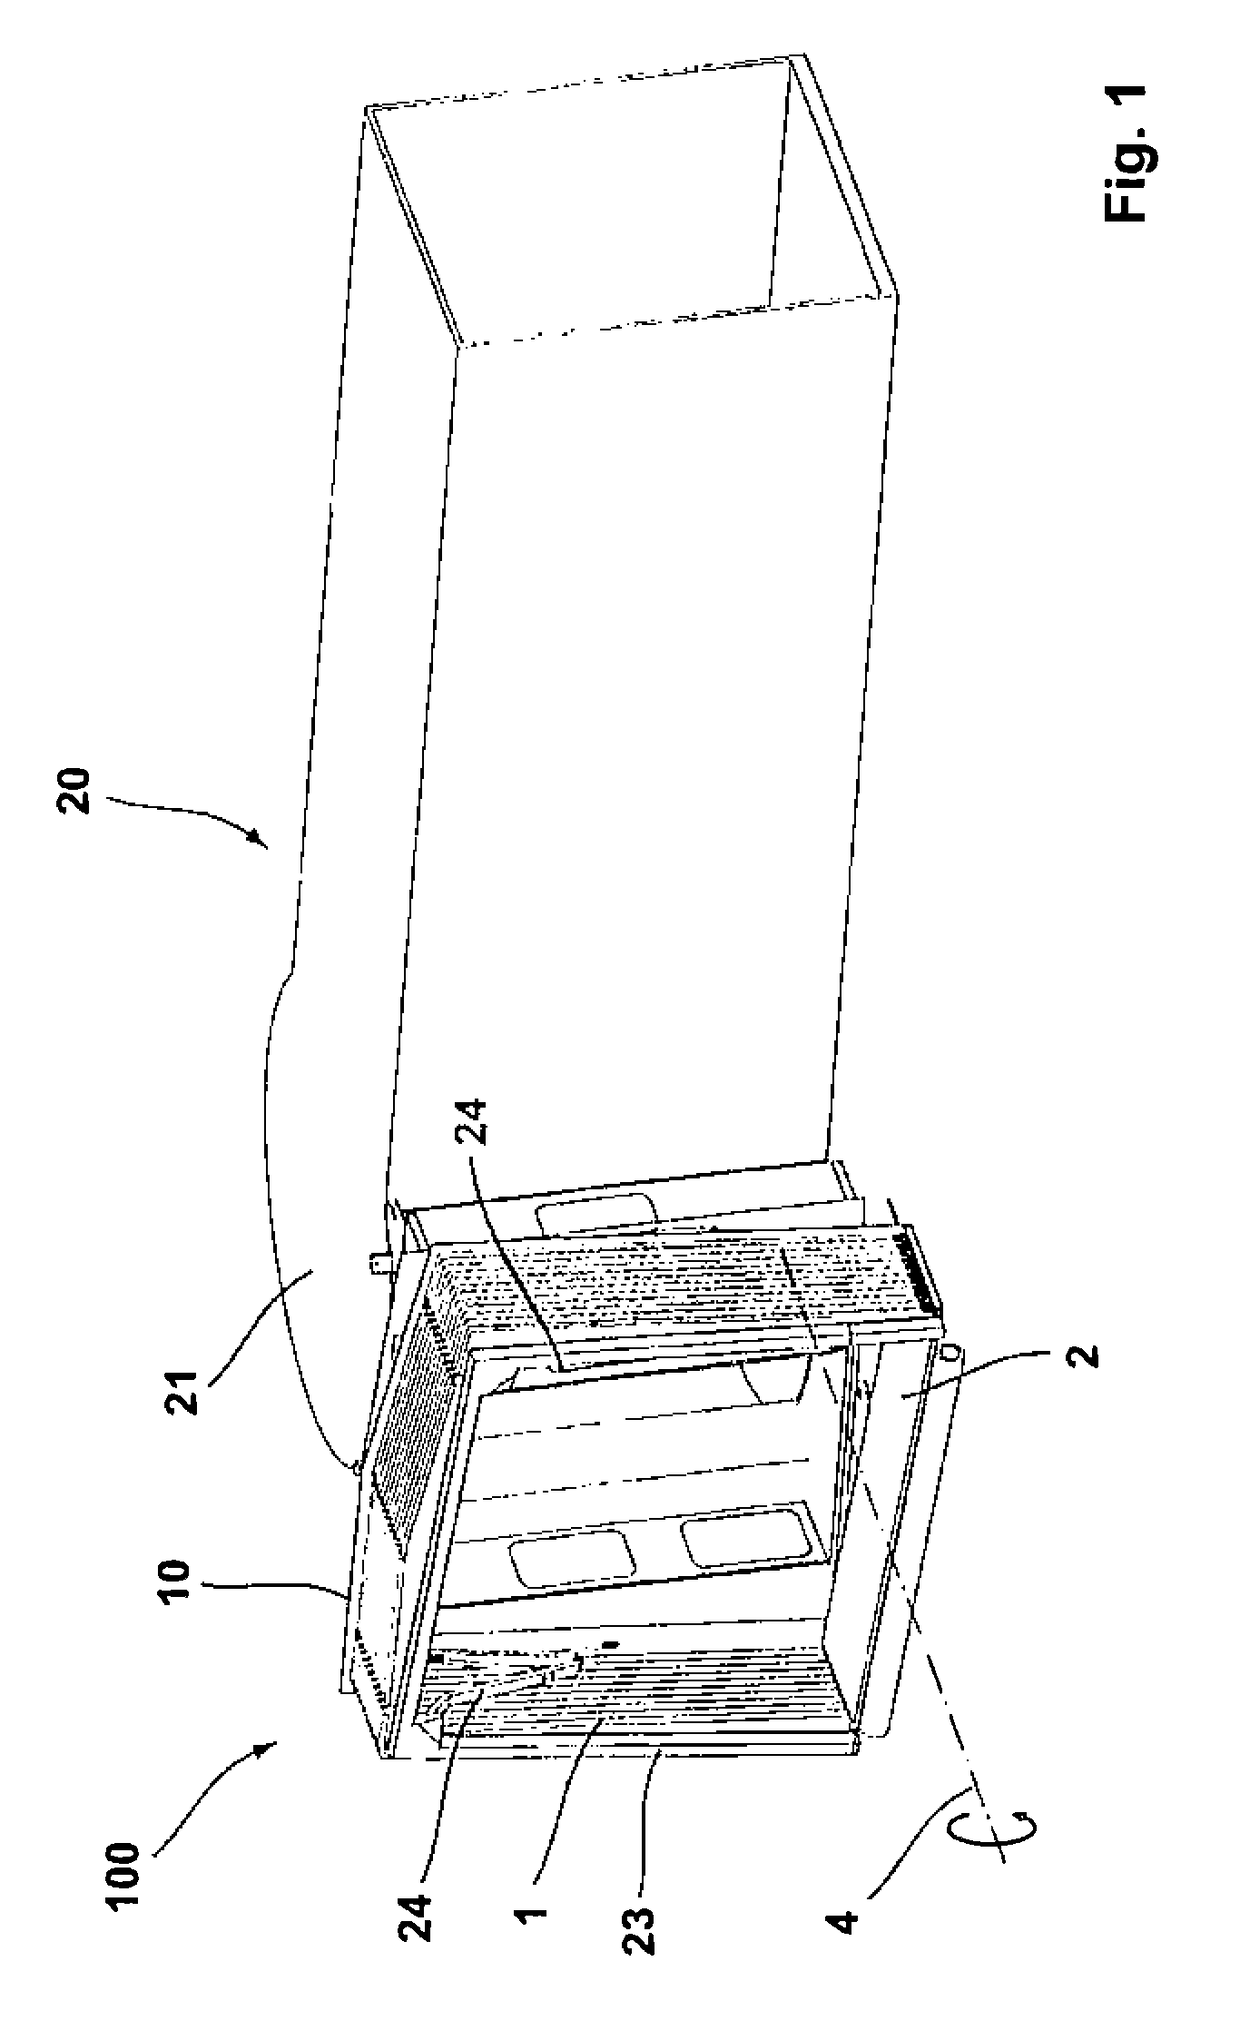 Coupling module for forming an interface between the cabin of a passenger bridge and an airplane